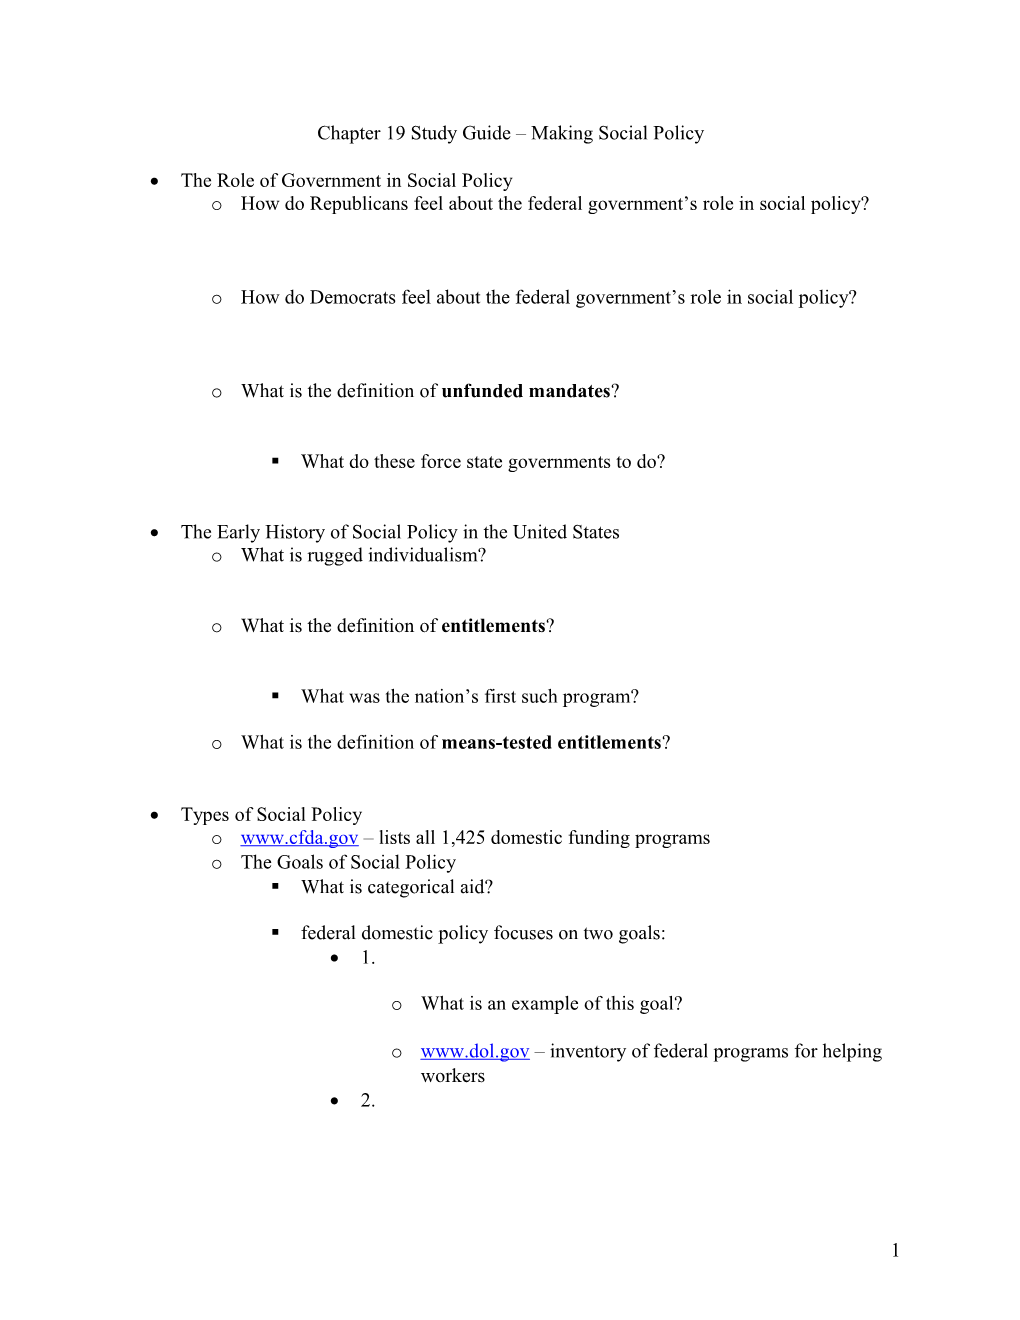 Chapter 19 Study Guide Making Social Policy